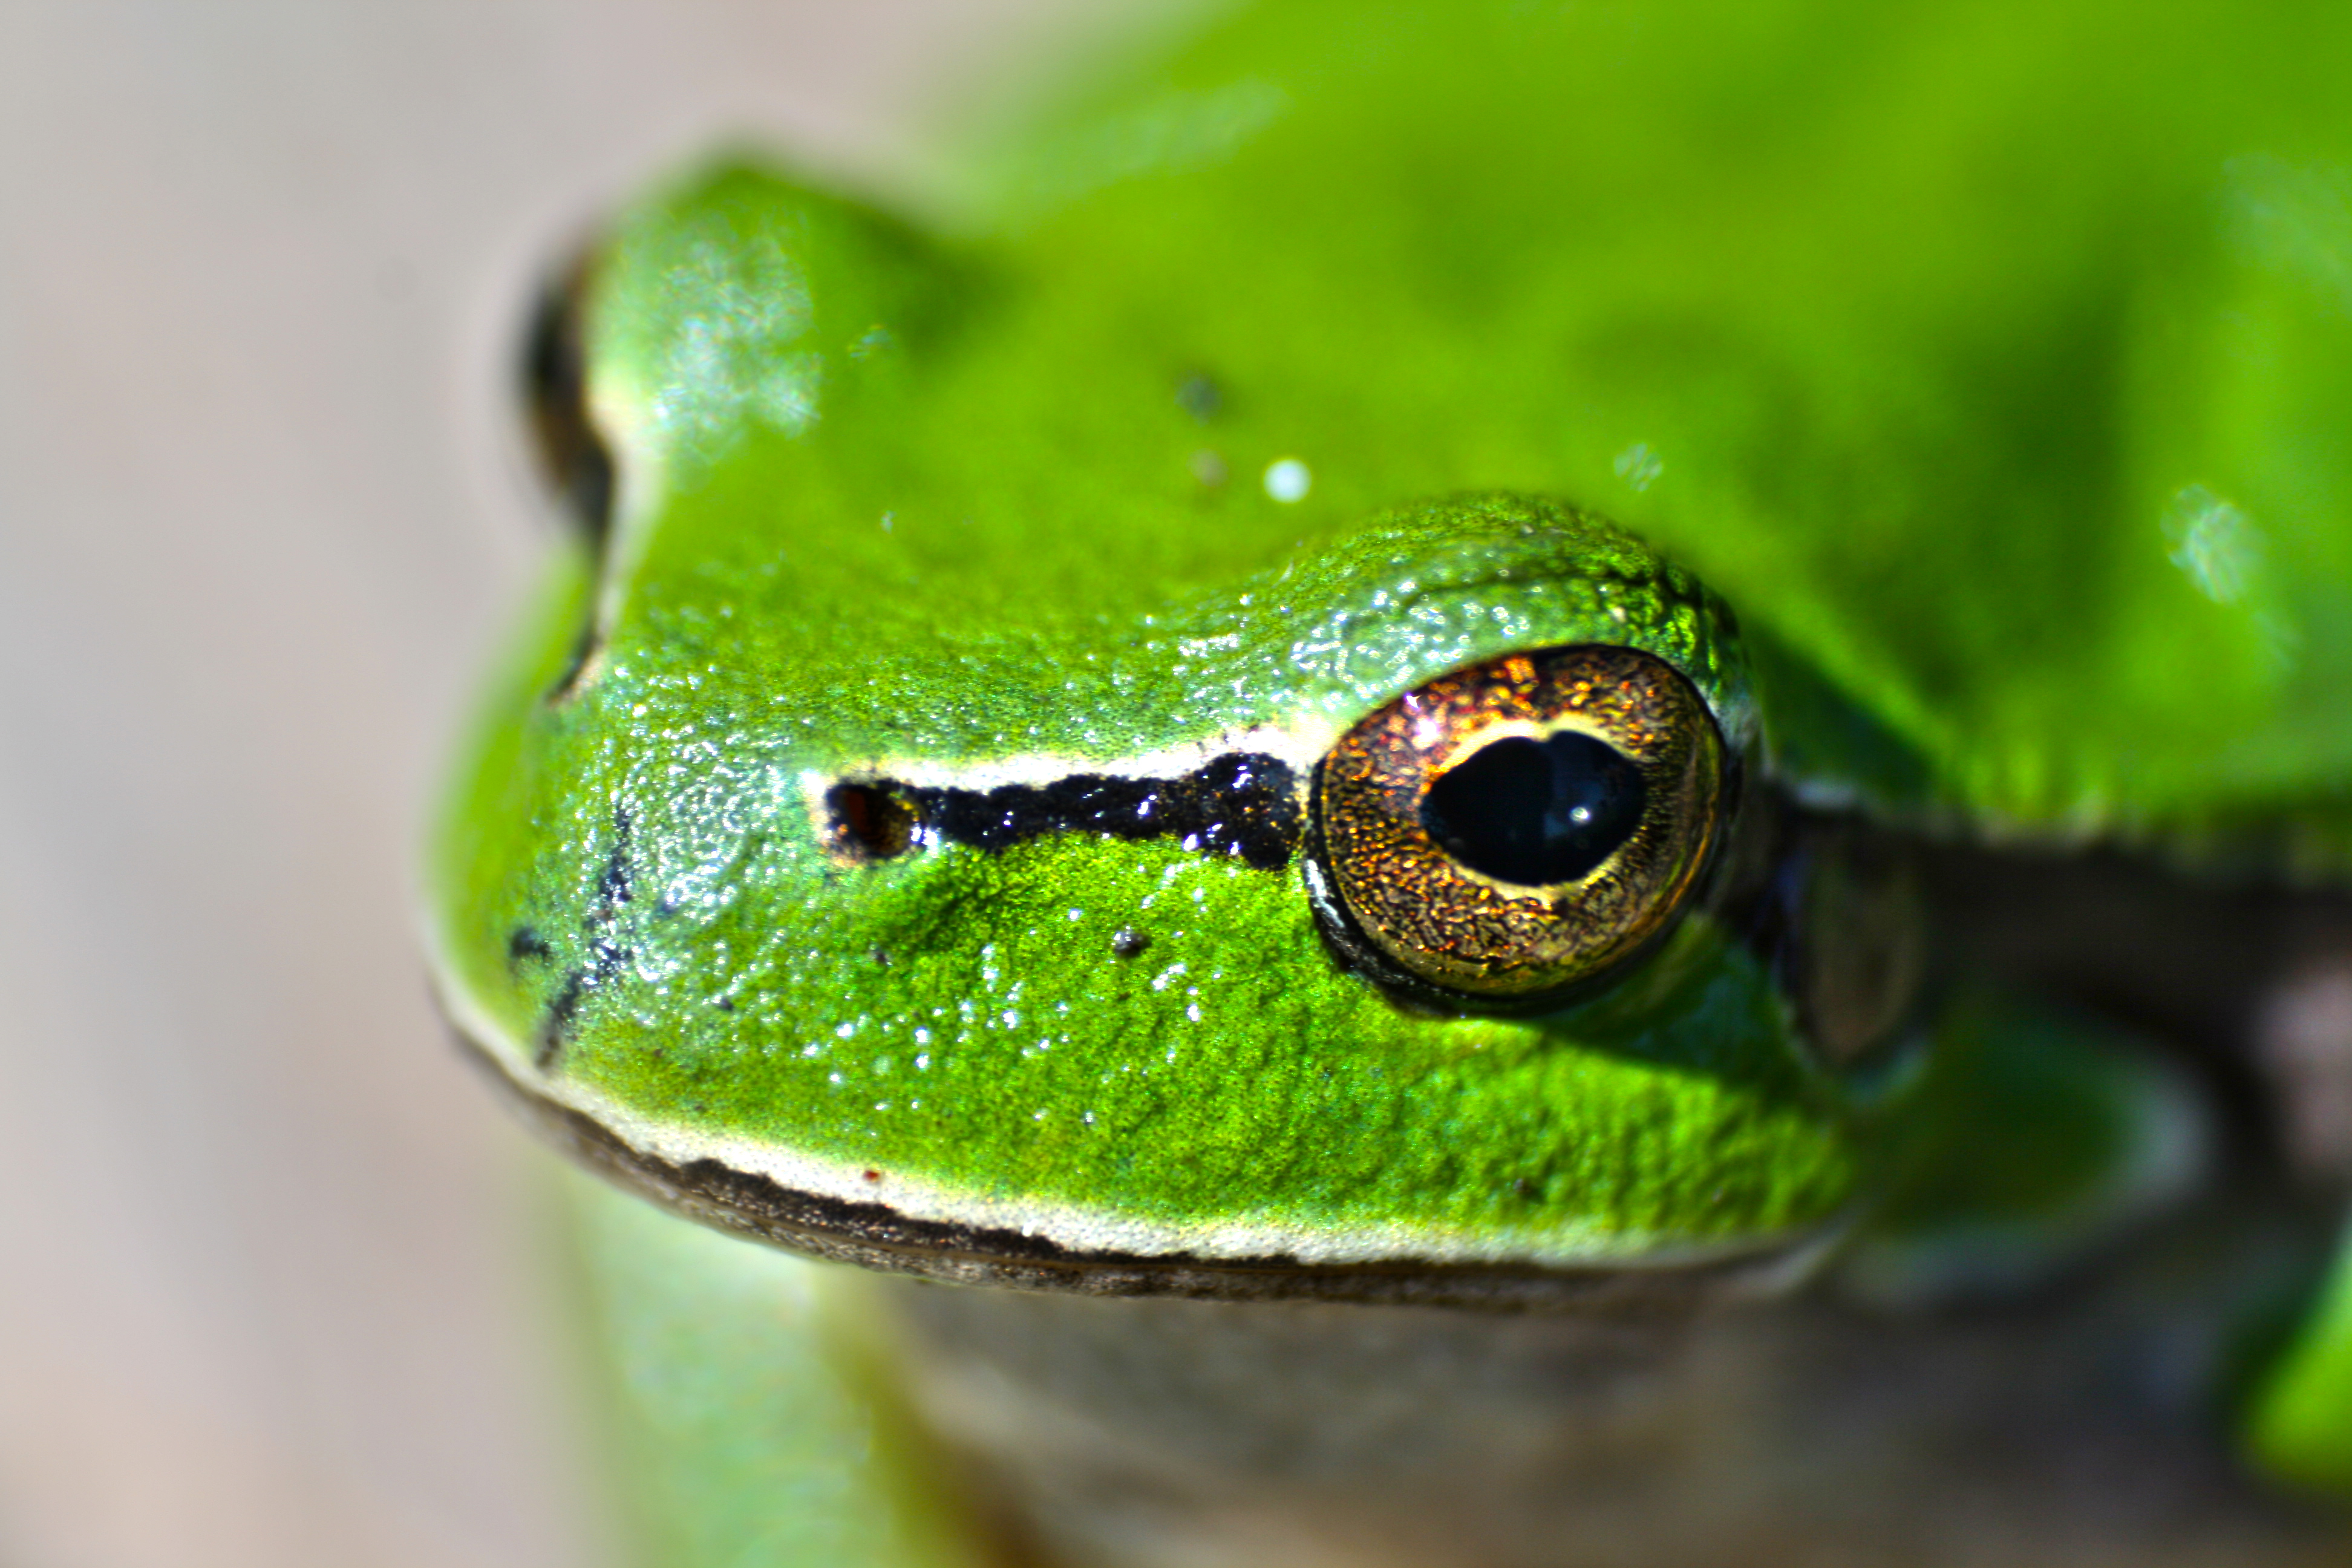 File:Closeup of a frog - 20090429.jpg - Wikimedia Commons